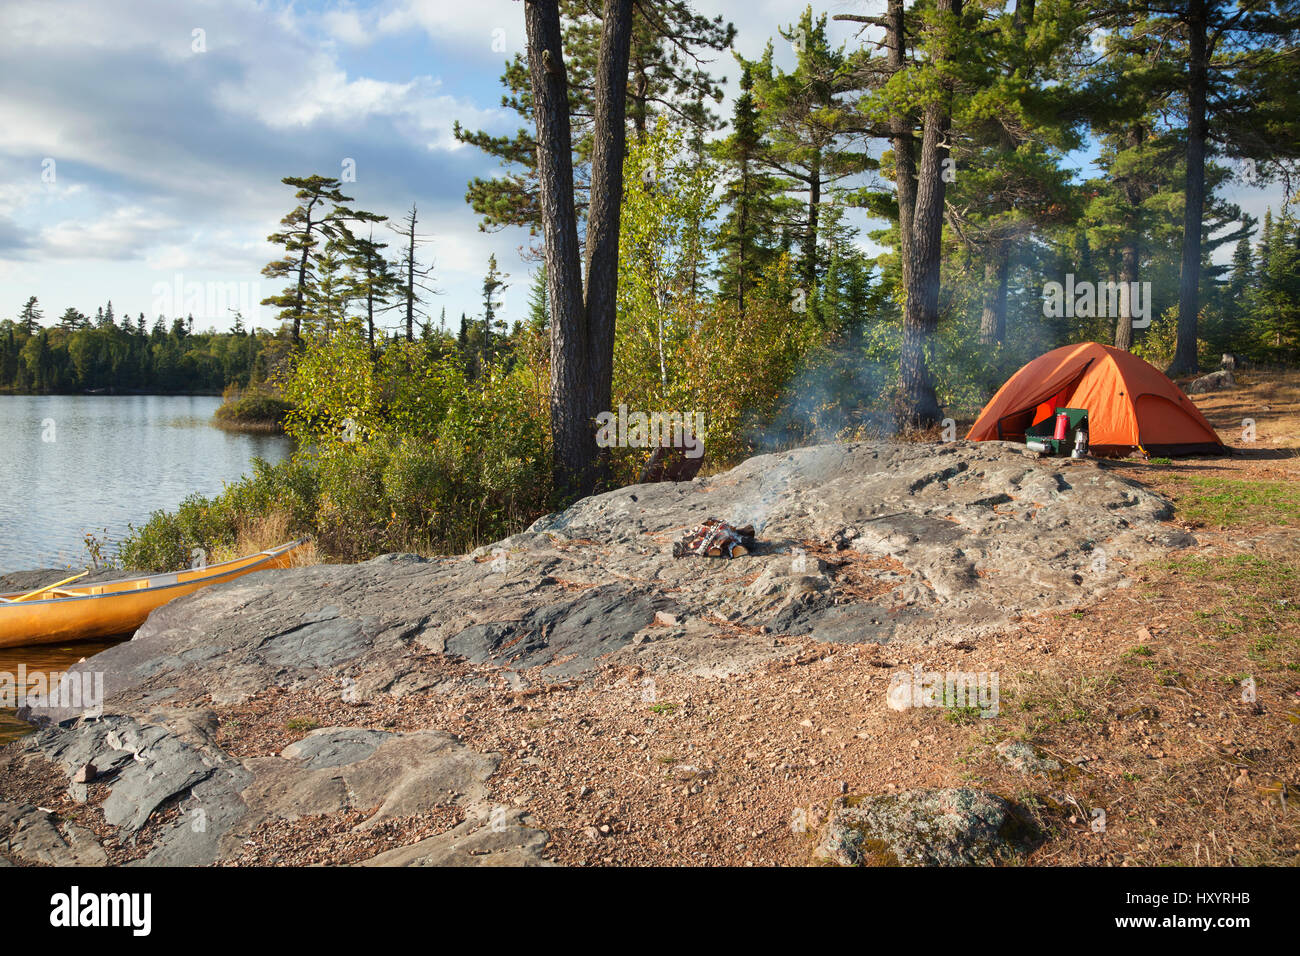 Campsite with orange tent and canoe on a lake in the Boundary Waters Canoe Area Wilderness of Minnesota Stock Photo